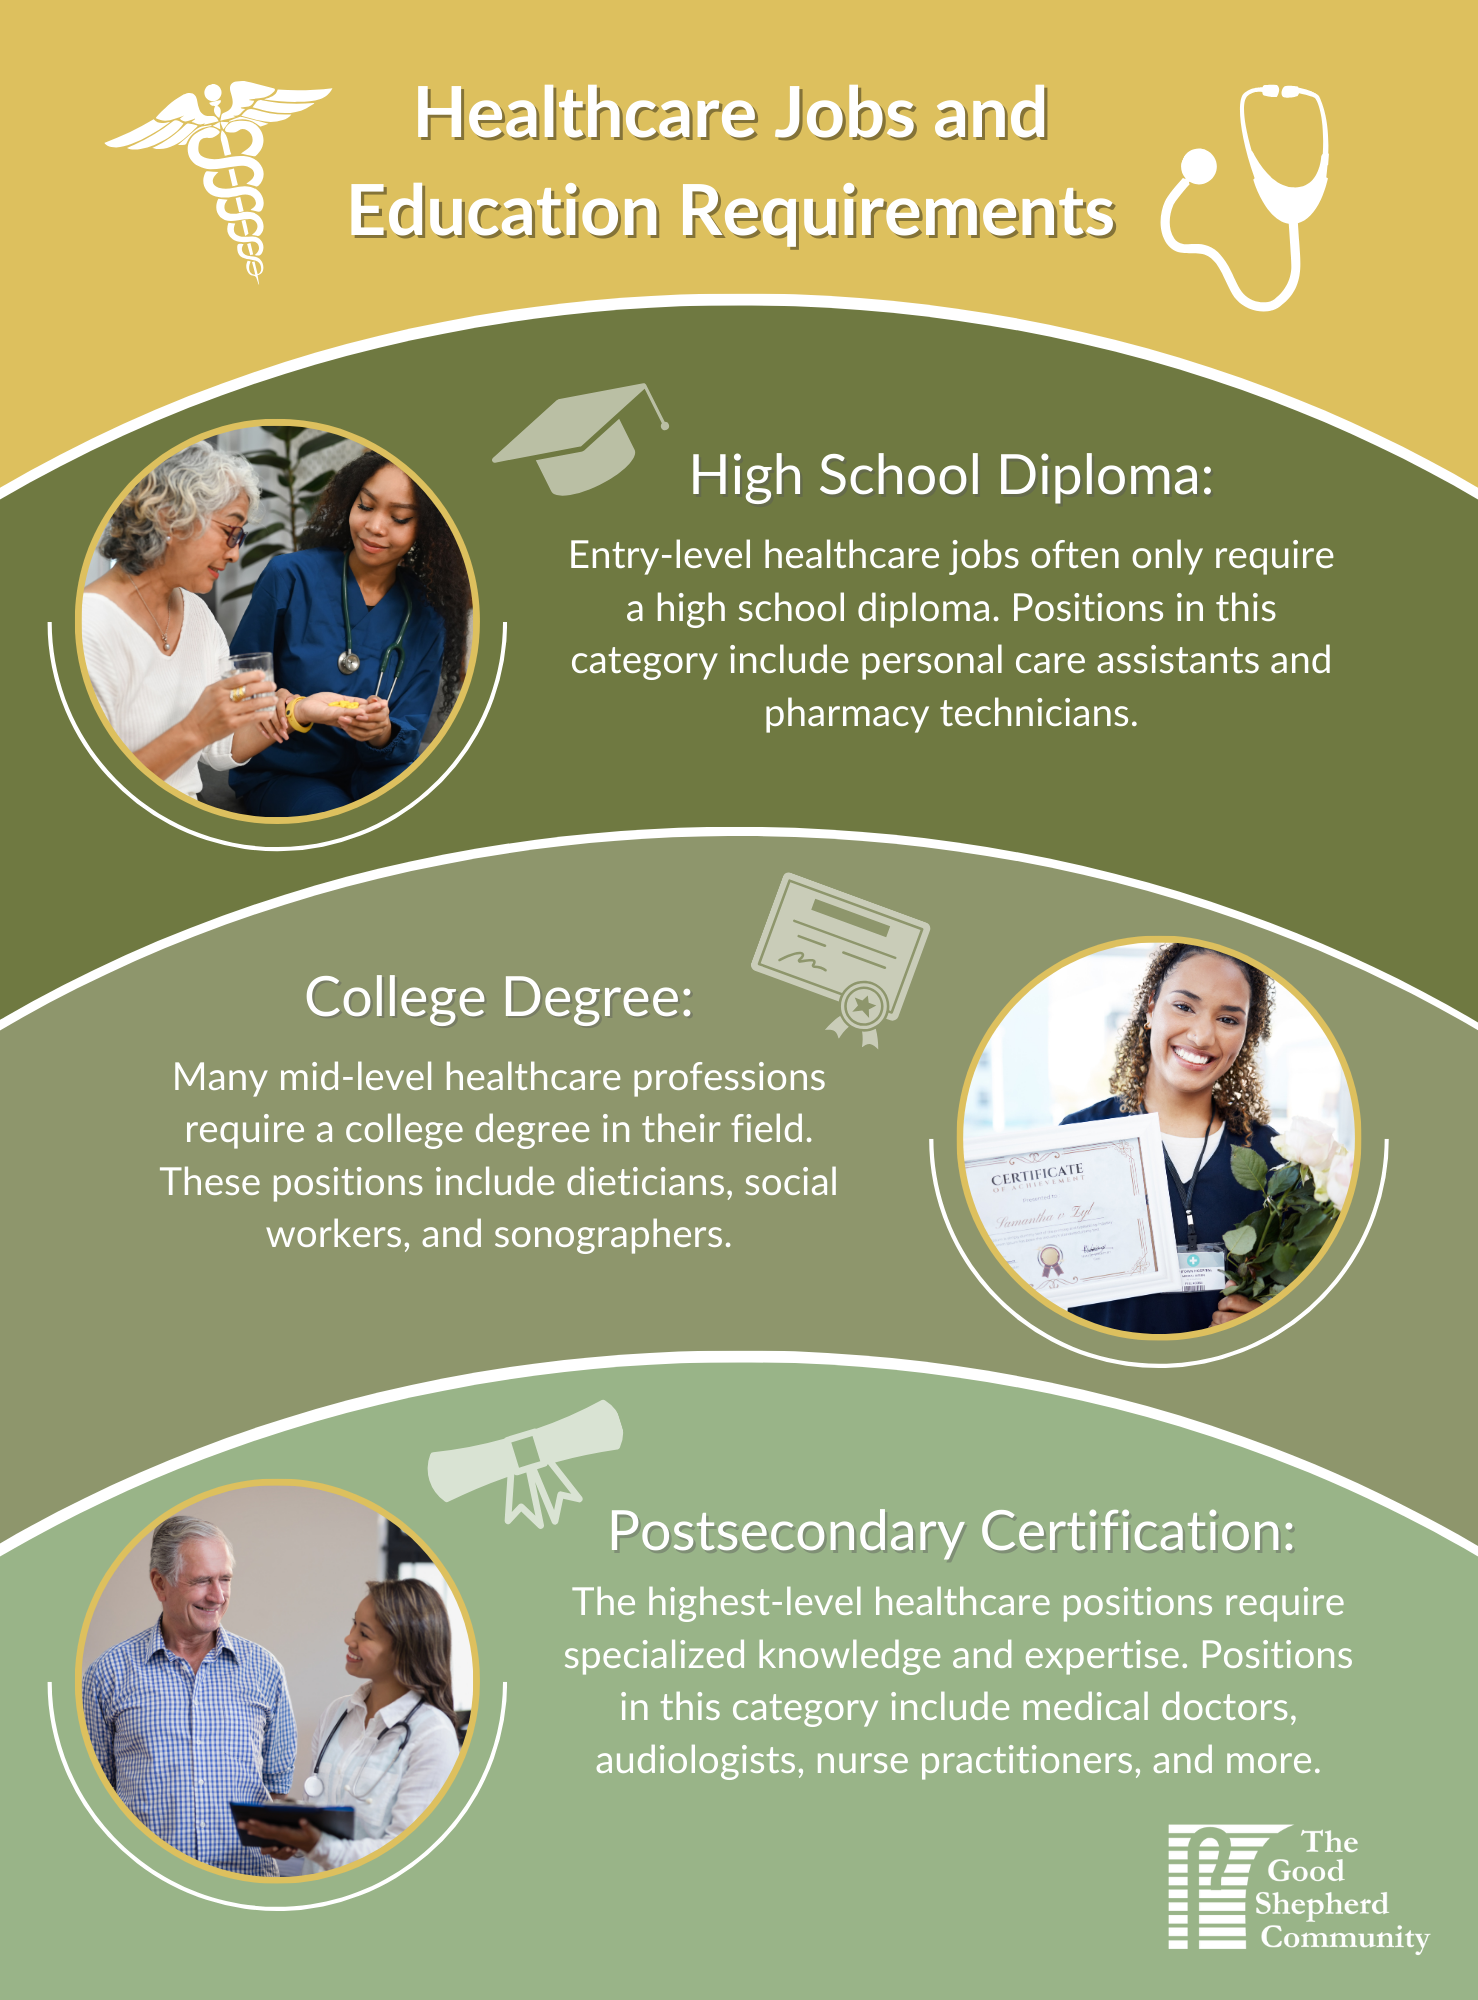 A brief infographic describing the three levels of education experience in the healthcare industry, including high-school diploma, college degree, and postsecondary certification. 